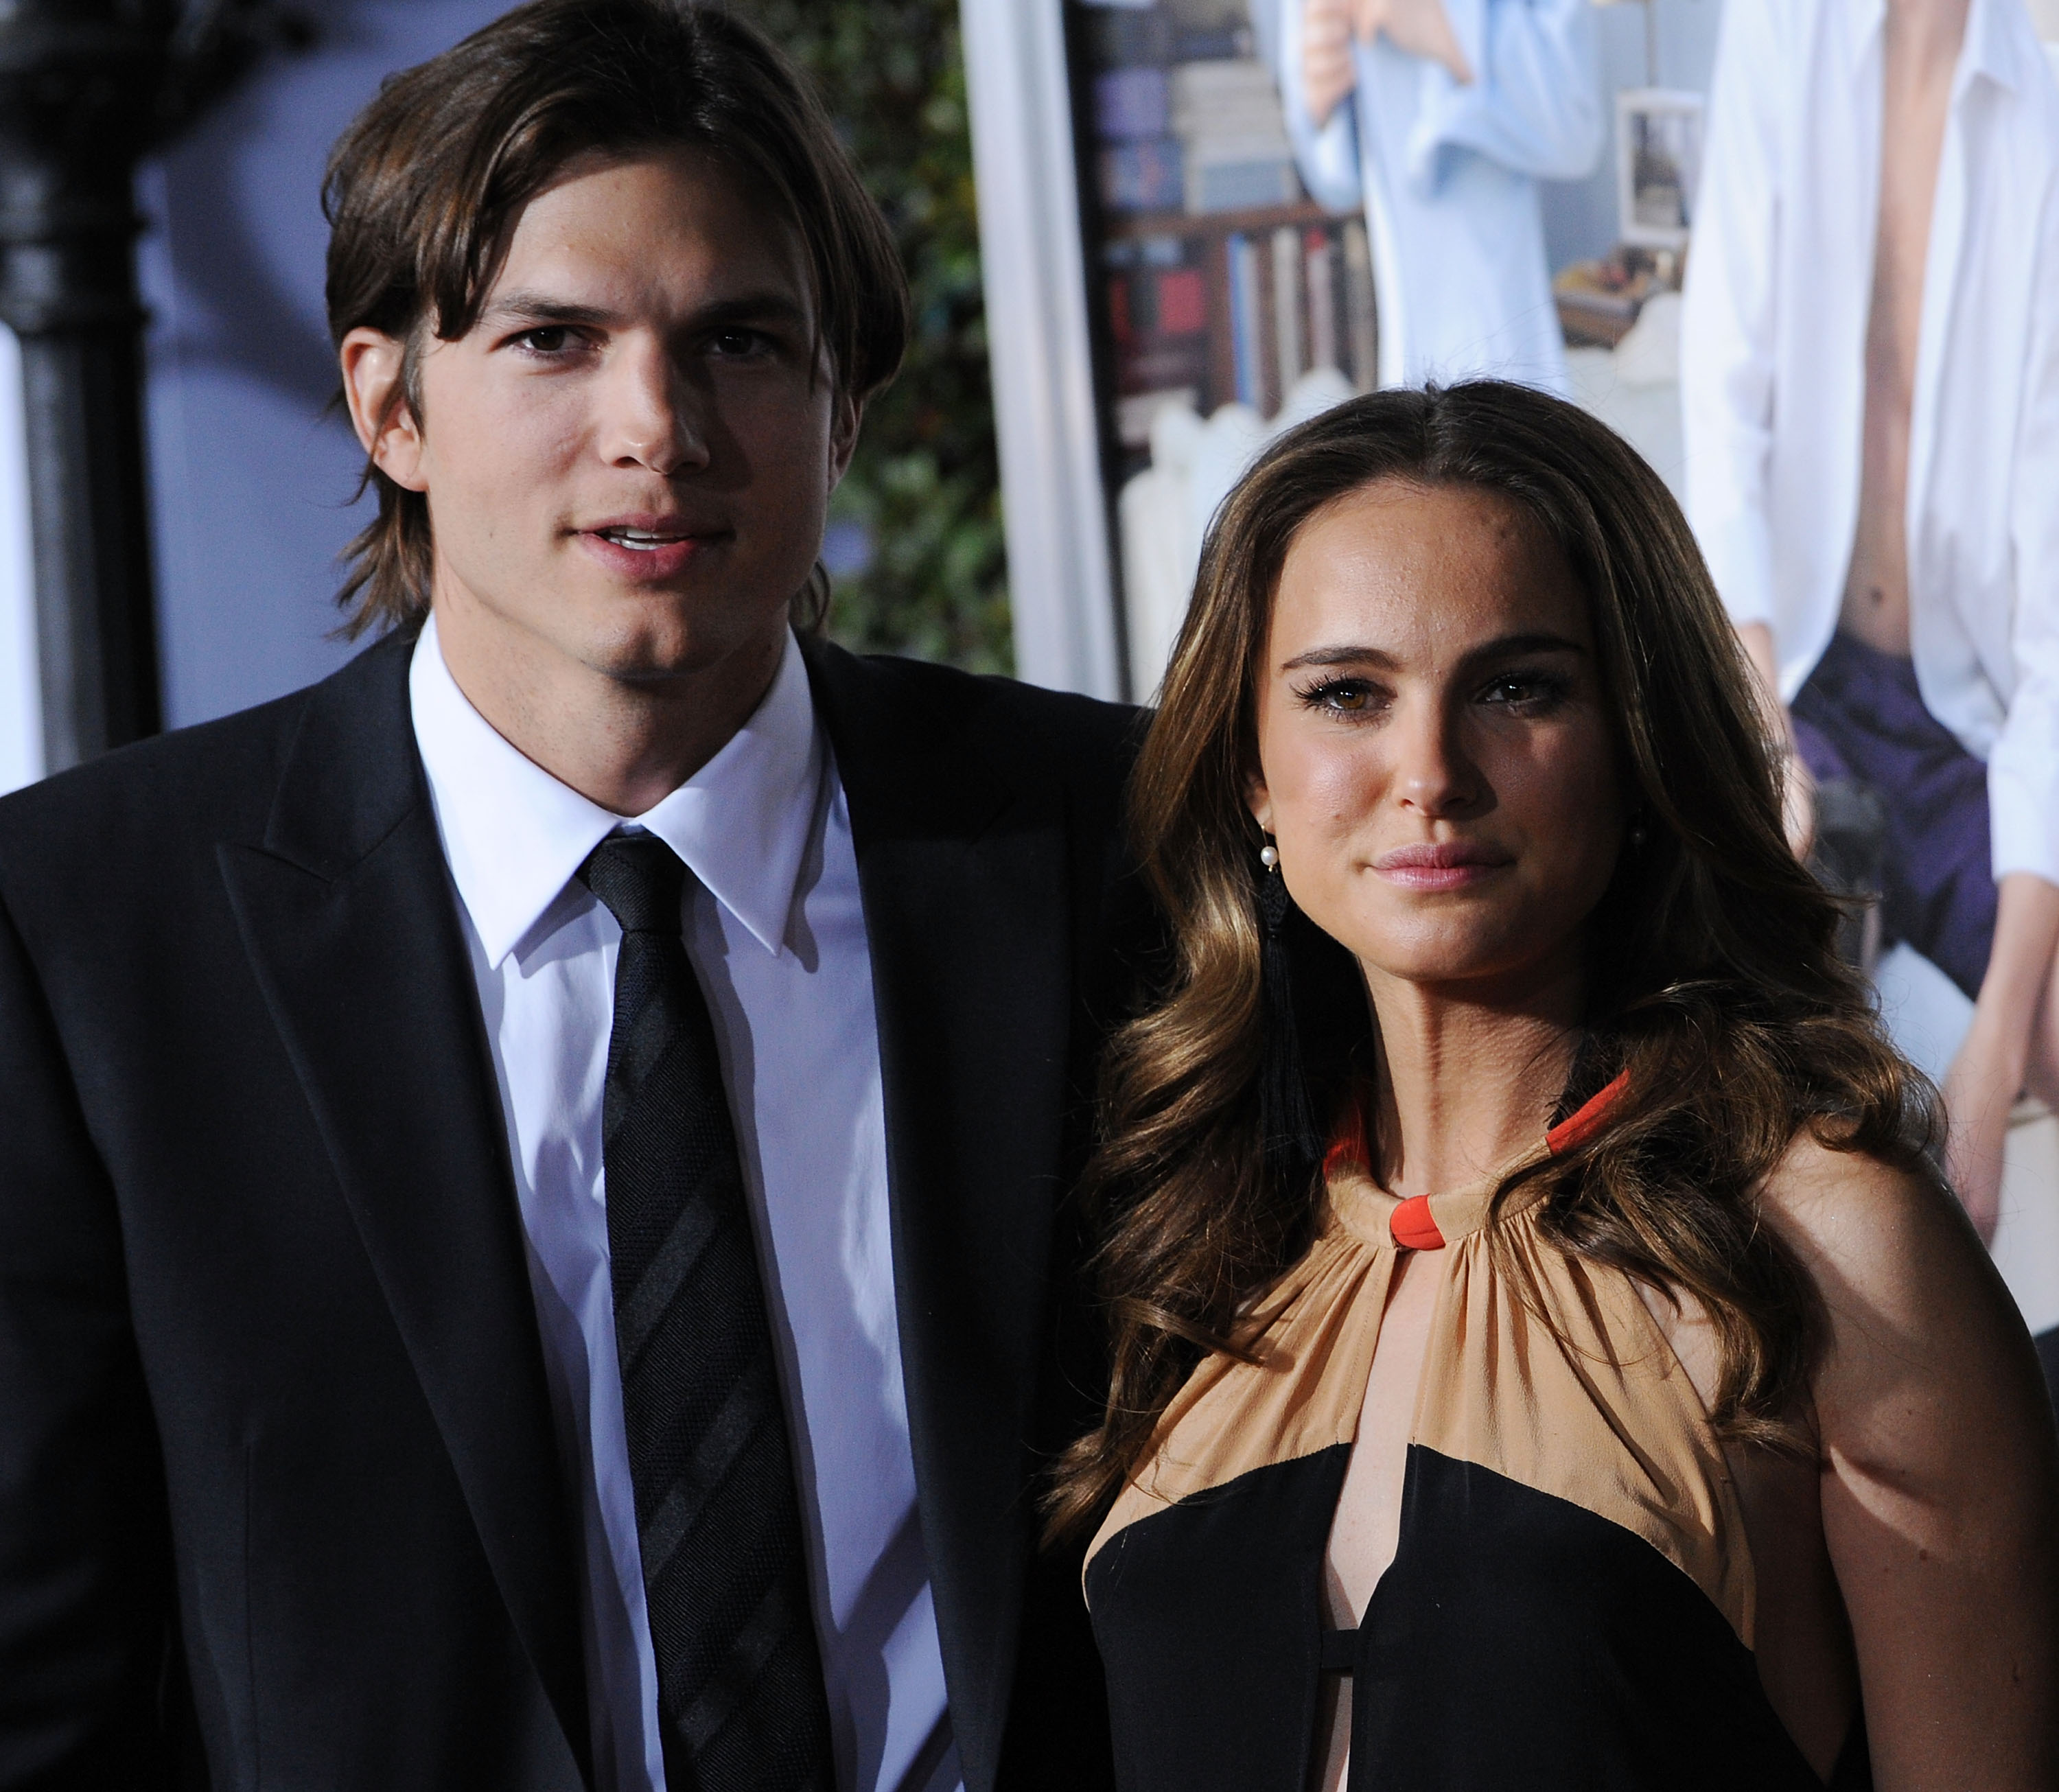 Ashton Kutcher and Natalie Portman arrive at the Los Angeles premiere "No Strings Attached" at Regency Village Theatre, on January 11, 2011, in Westwood, California. | Source: Getty Images